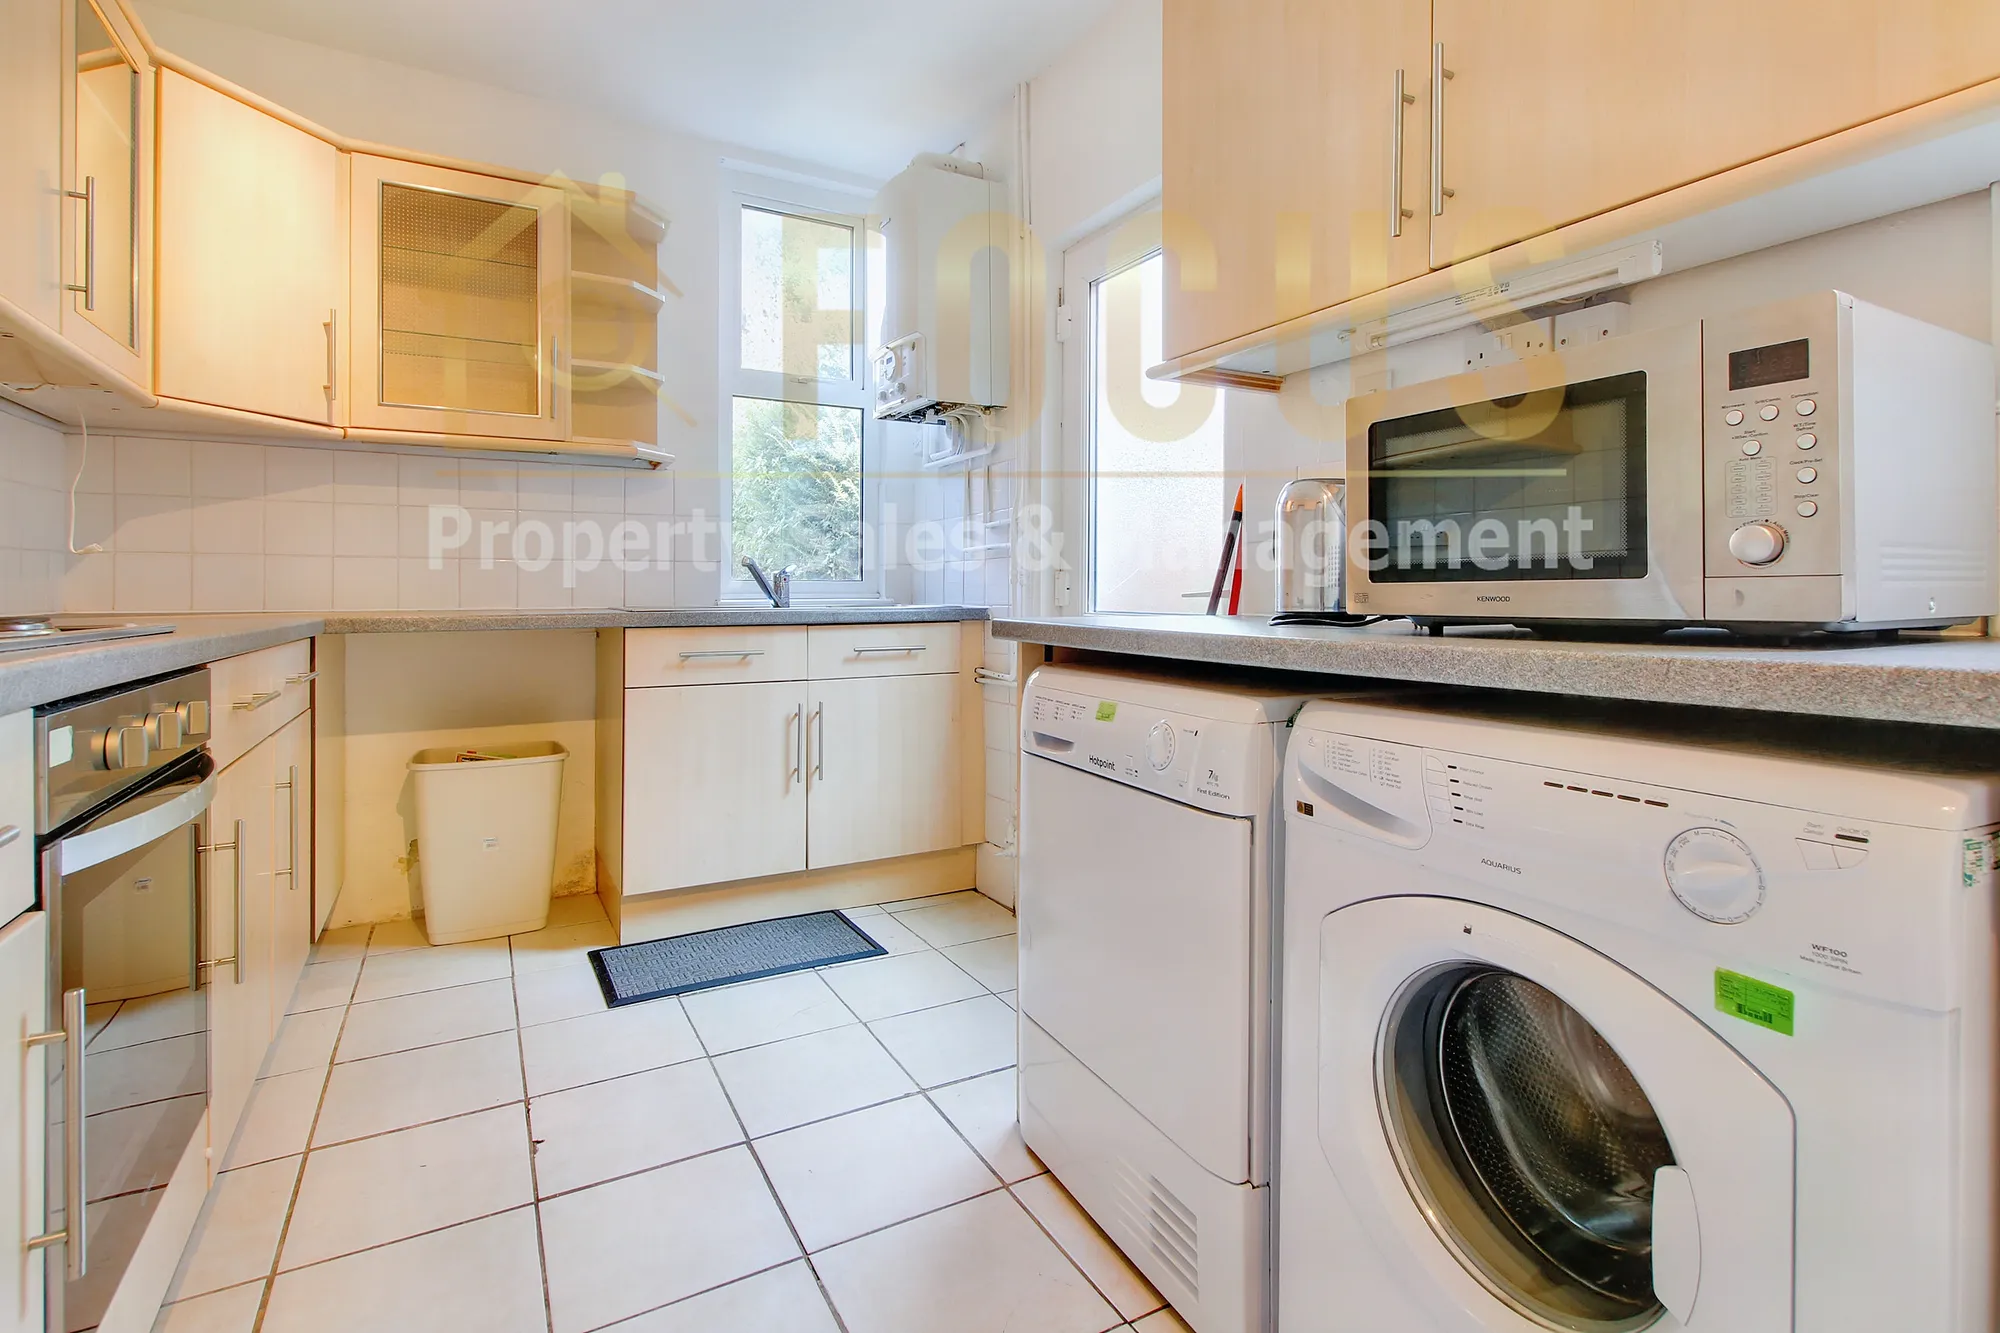 4 bed mid-terraced house to rent in Lytham Road, Leicester  - Property Image 3